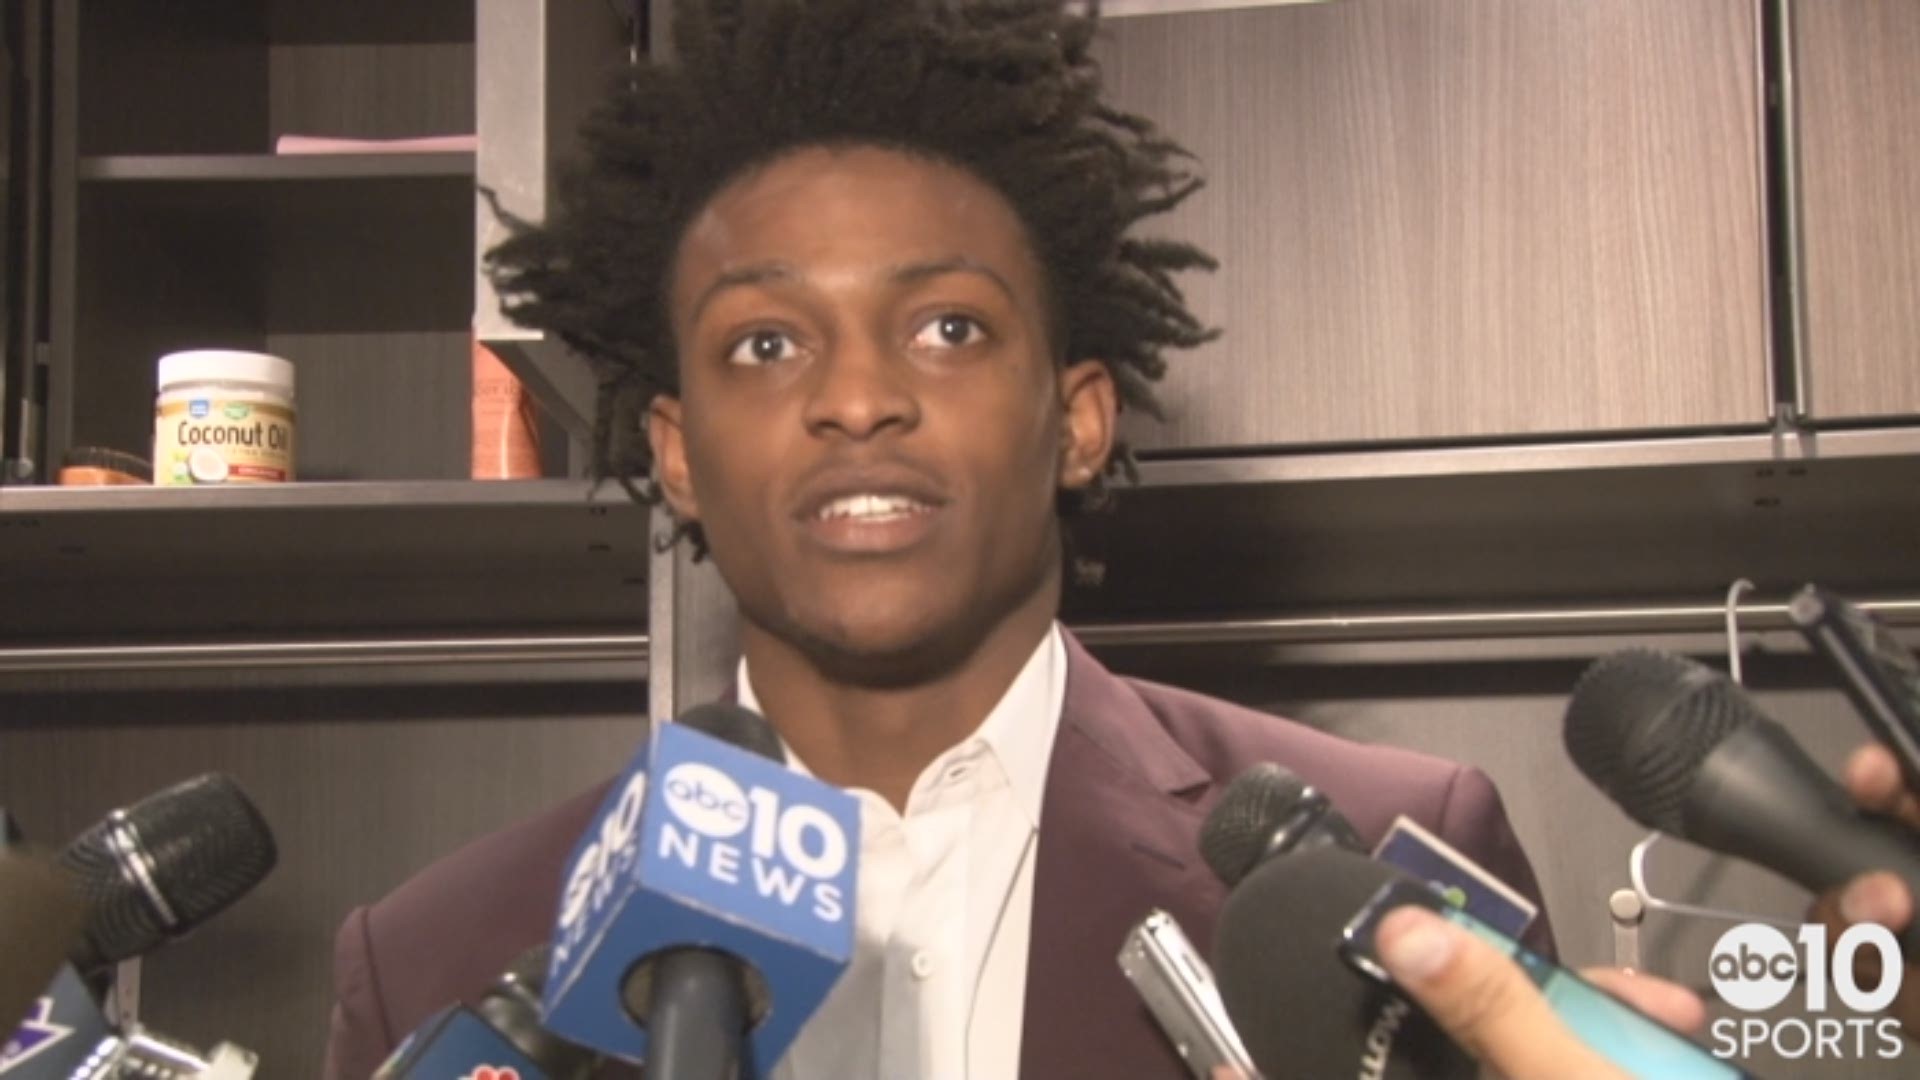 Sacramento Kings rookie De'Aaron Fox discusses Wednesday's season opening loss to the Houston Rockets and making his NBA debut.